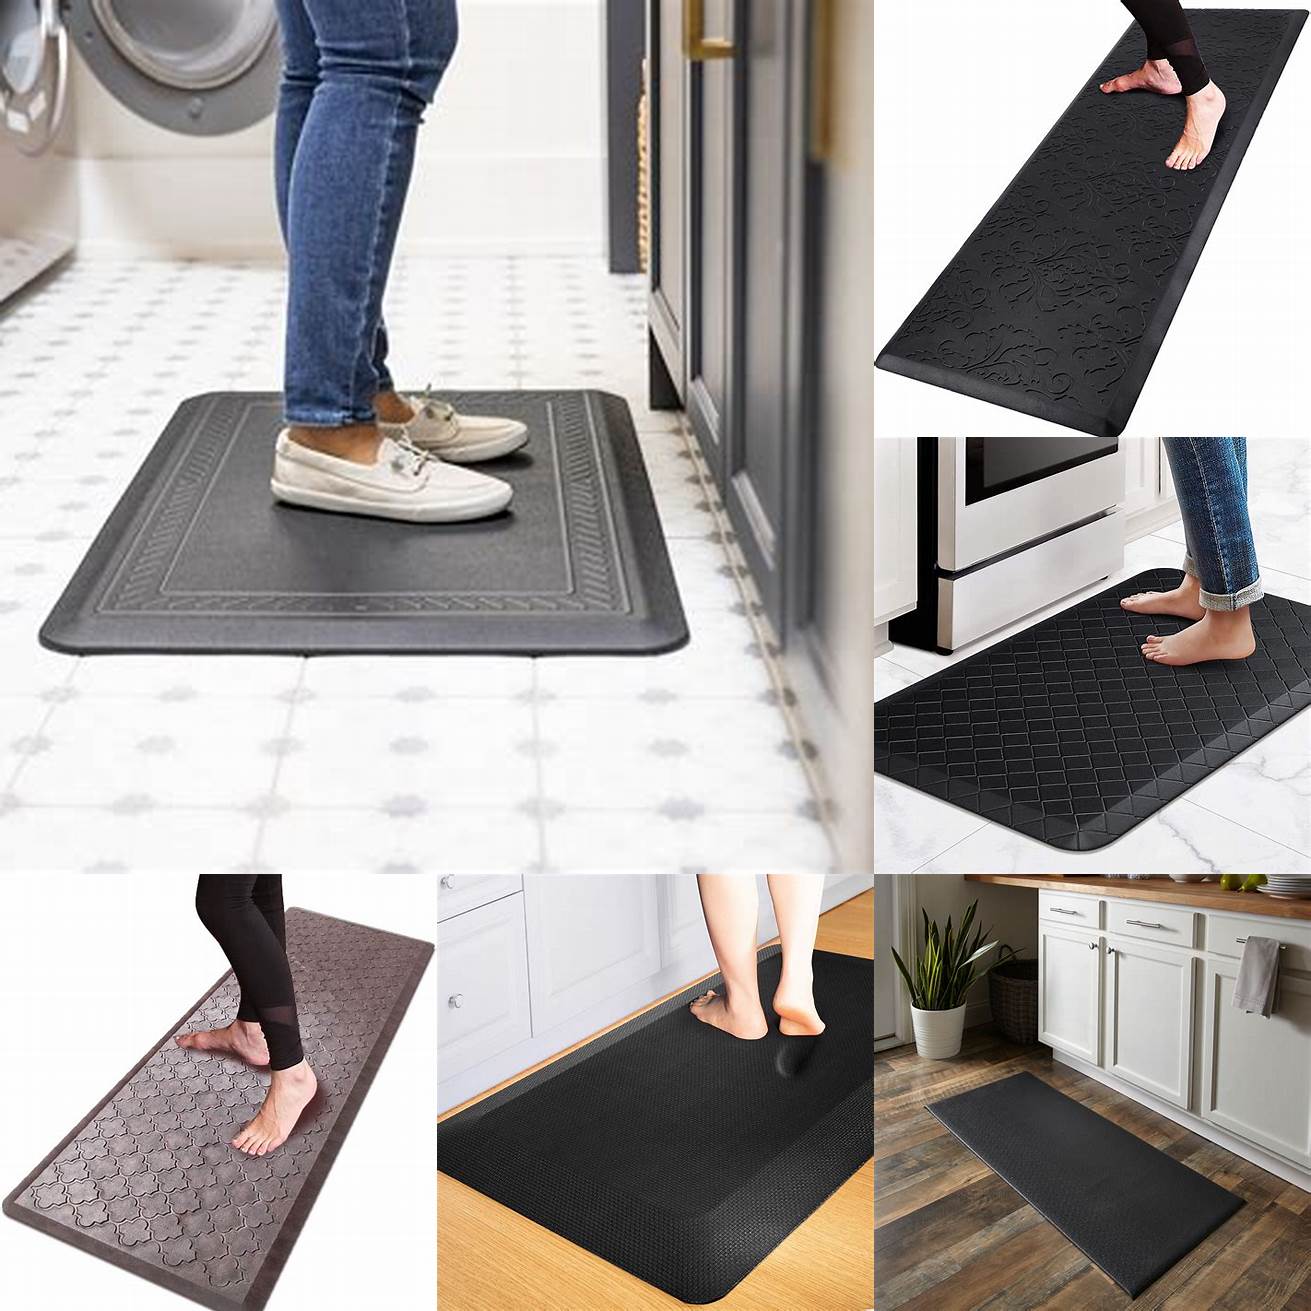 Cushioning - A cushioned mat can reduce fatigue and discomfort